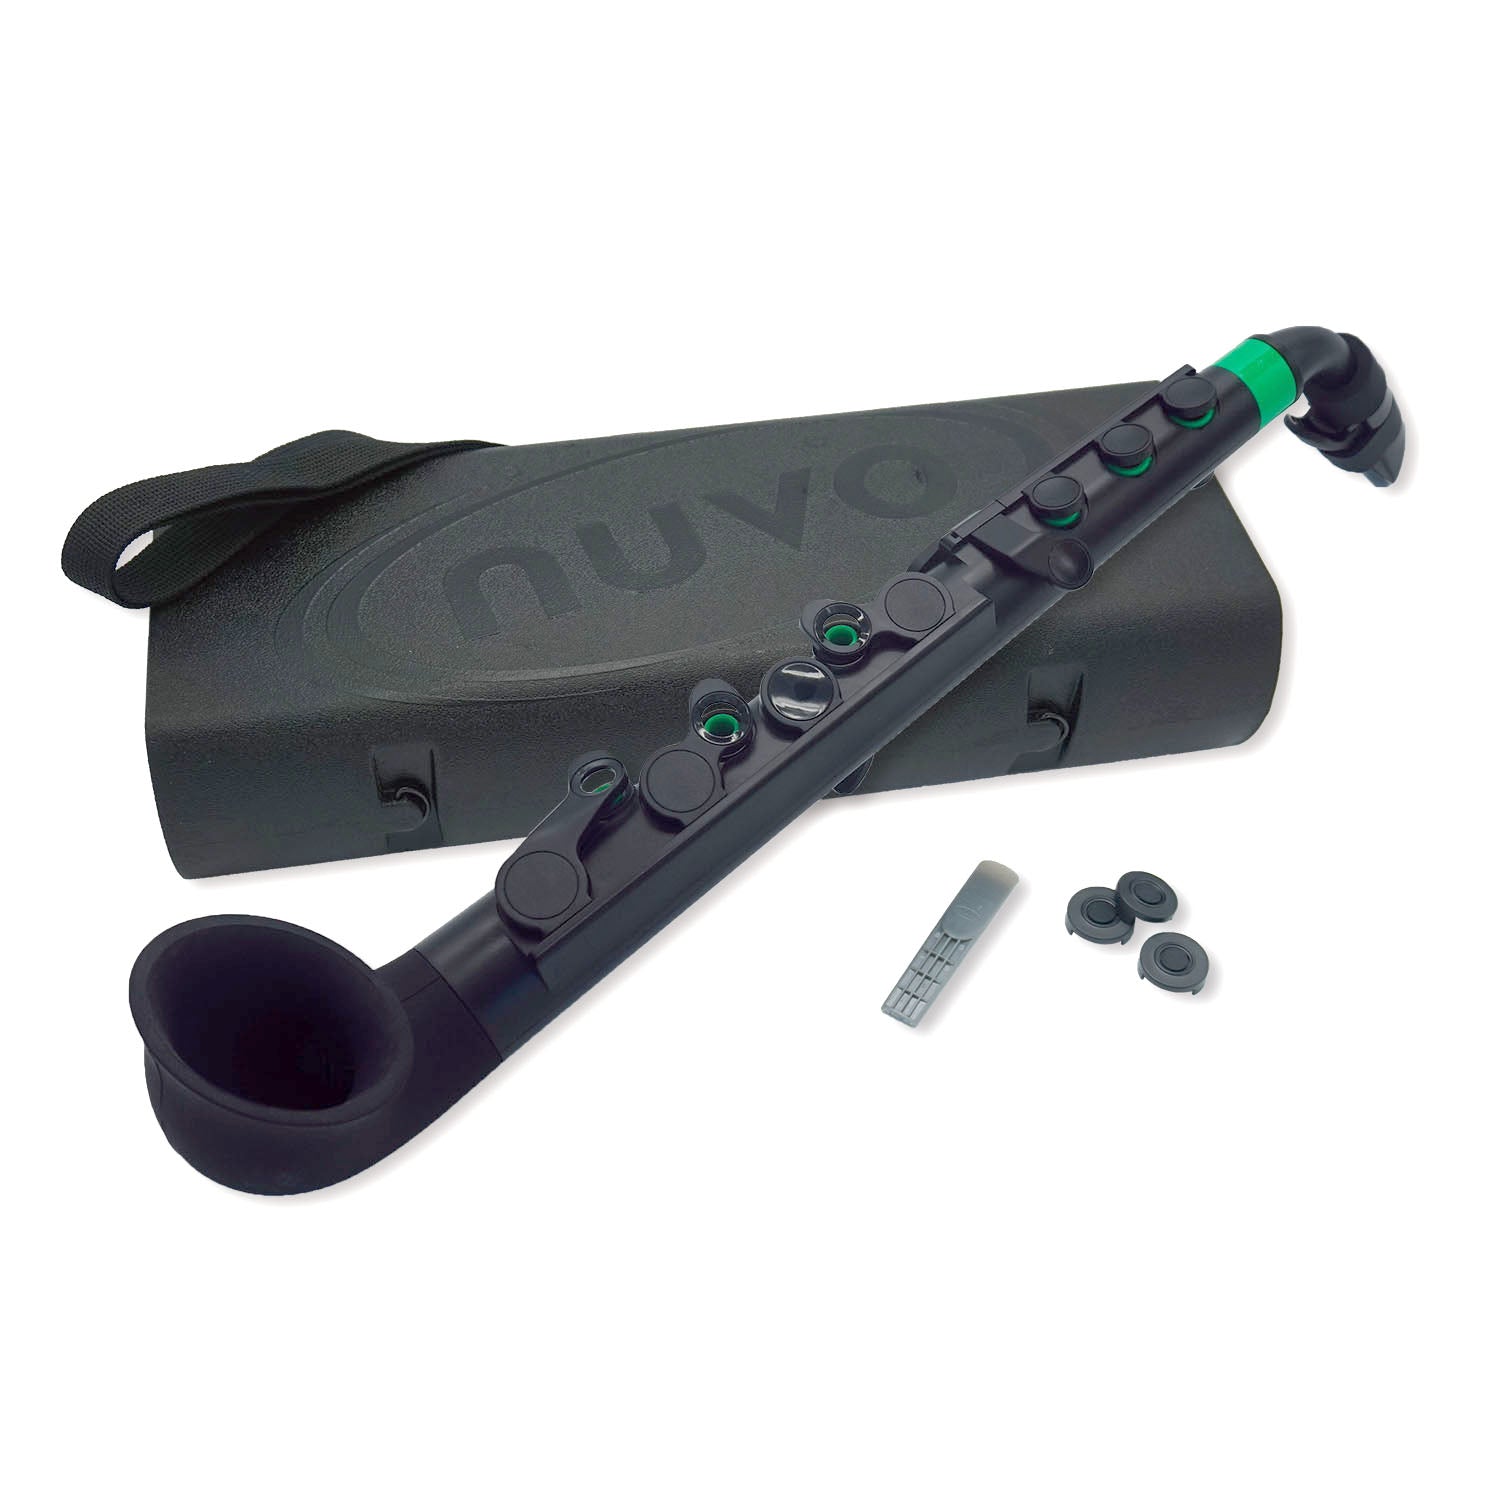 Nuvo jSax 2.0 in C (assorted colors)